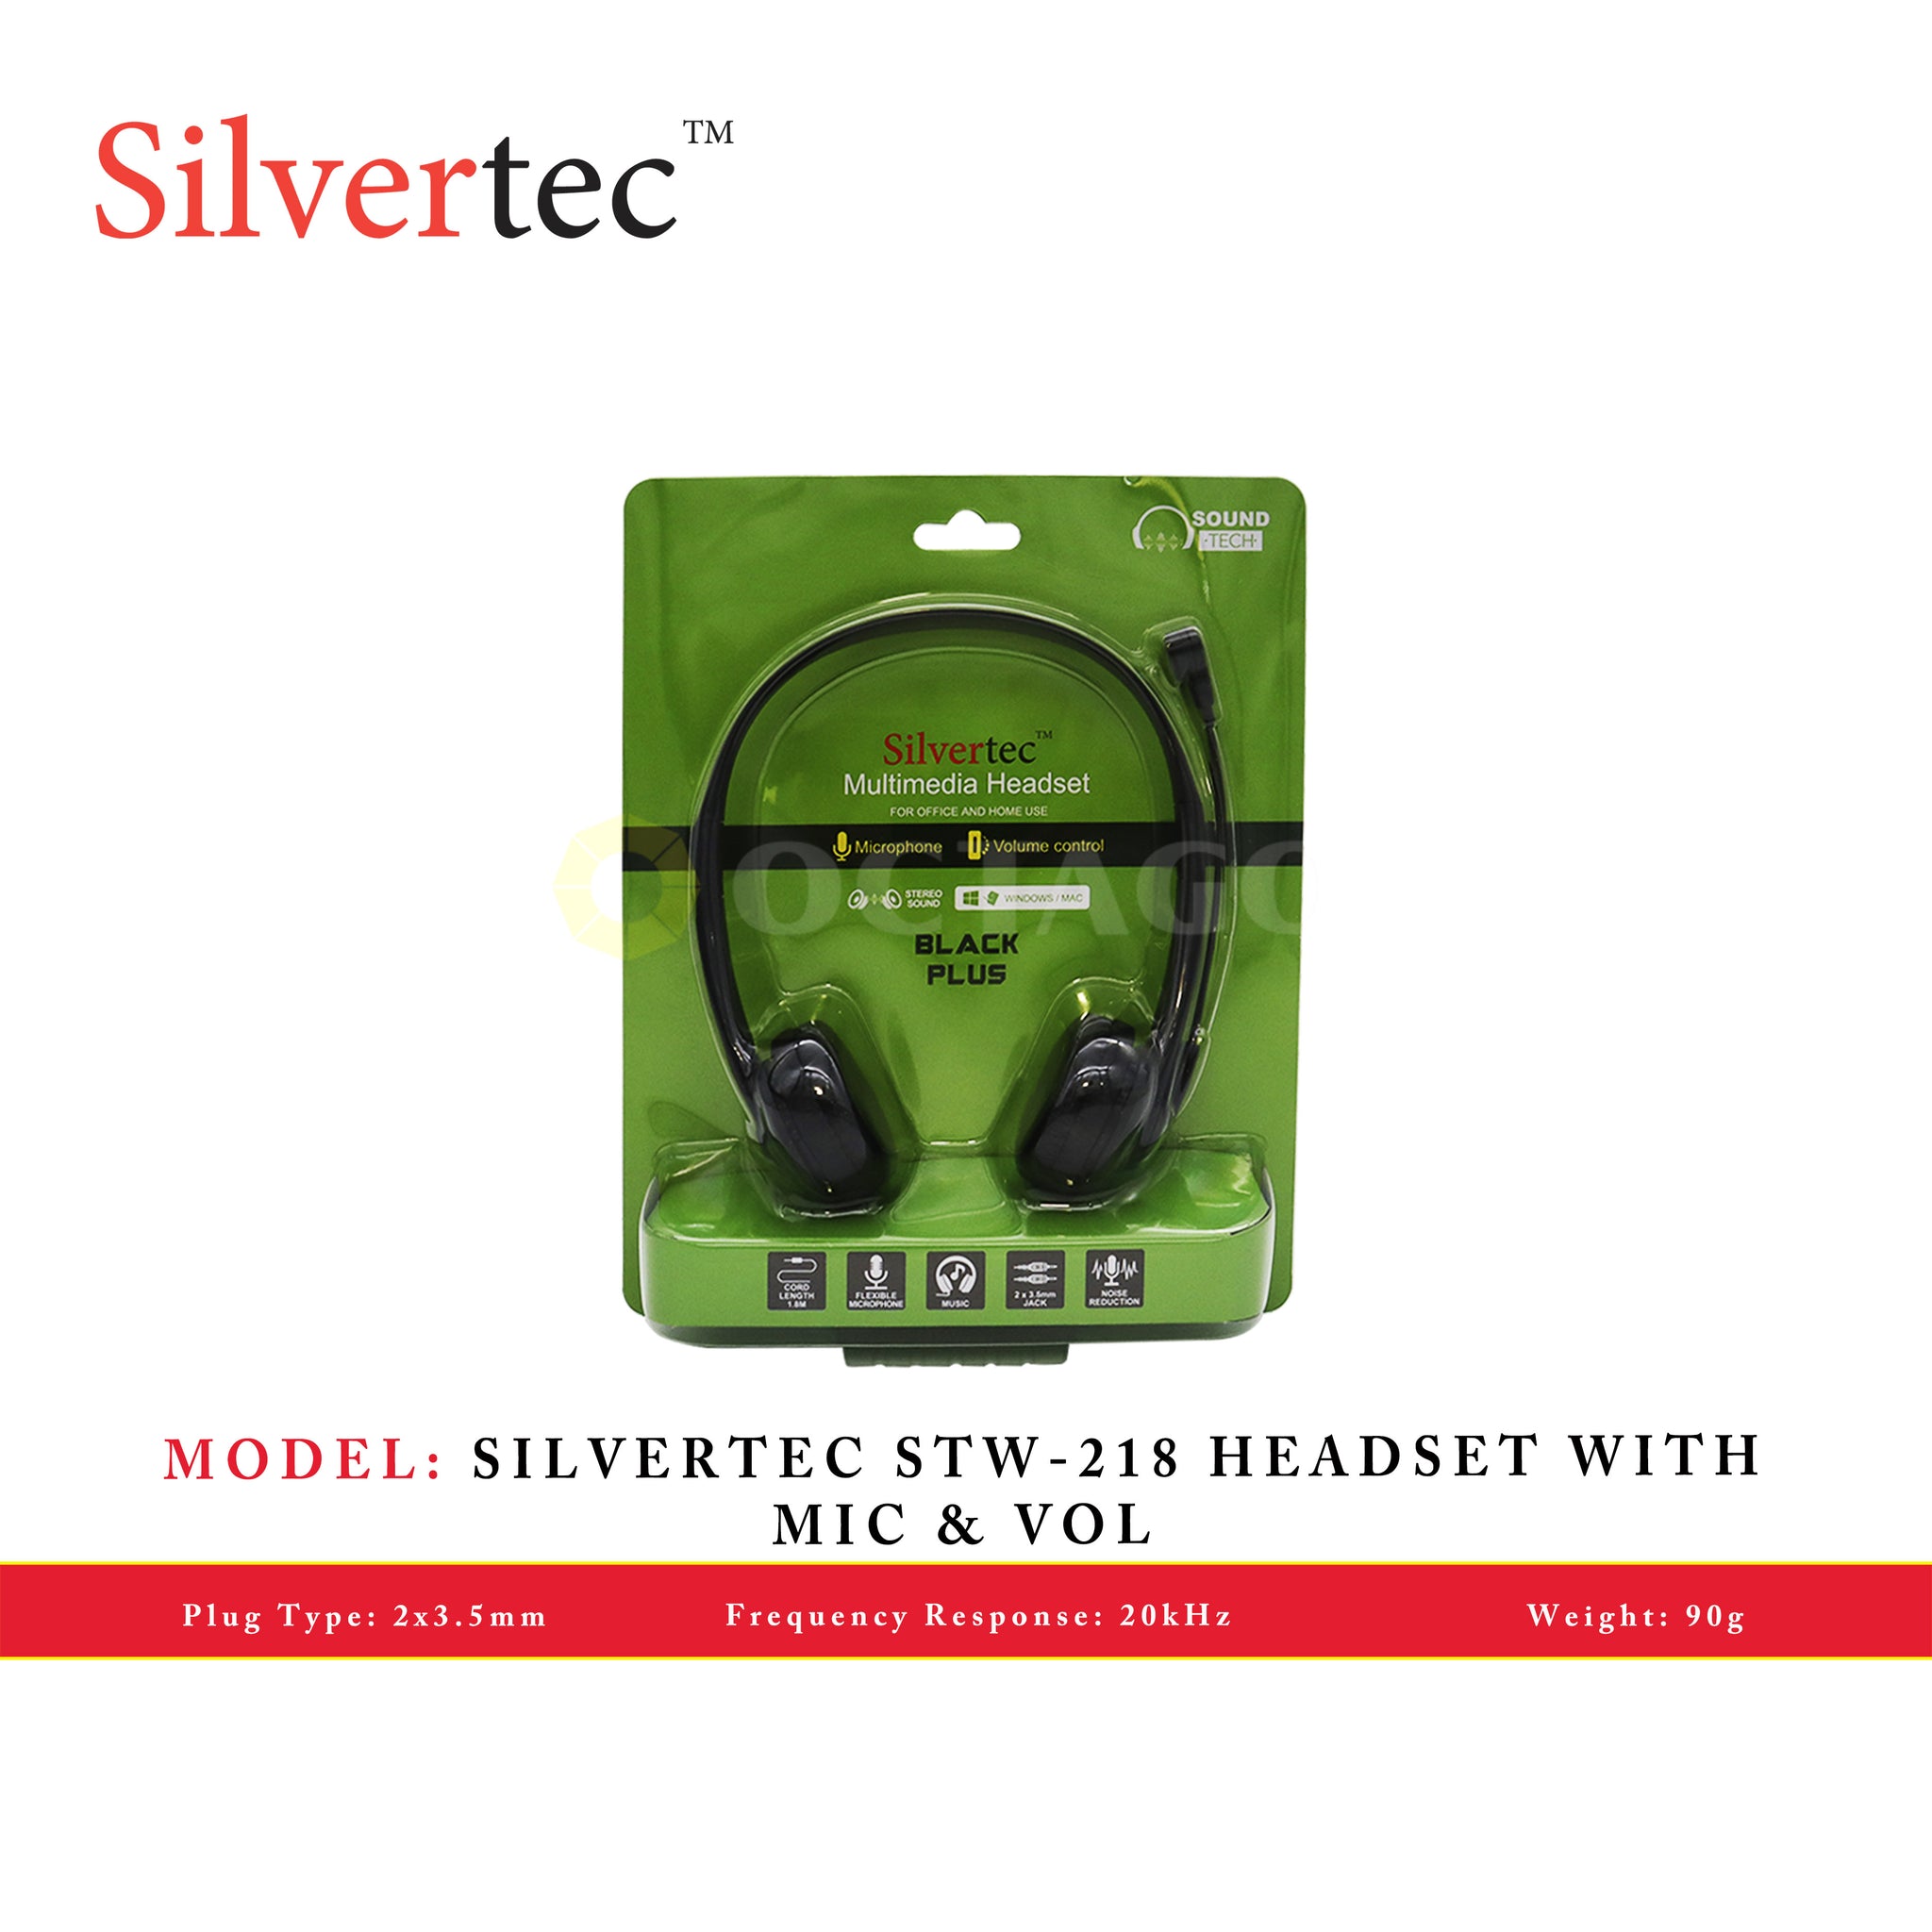 SILVERTEC STW-218 HEADSET WITH MIC & VOL